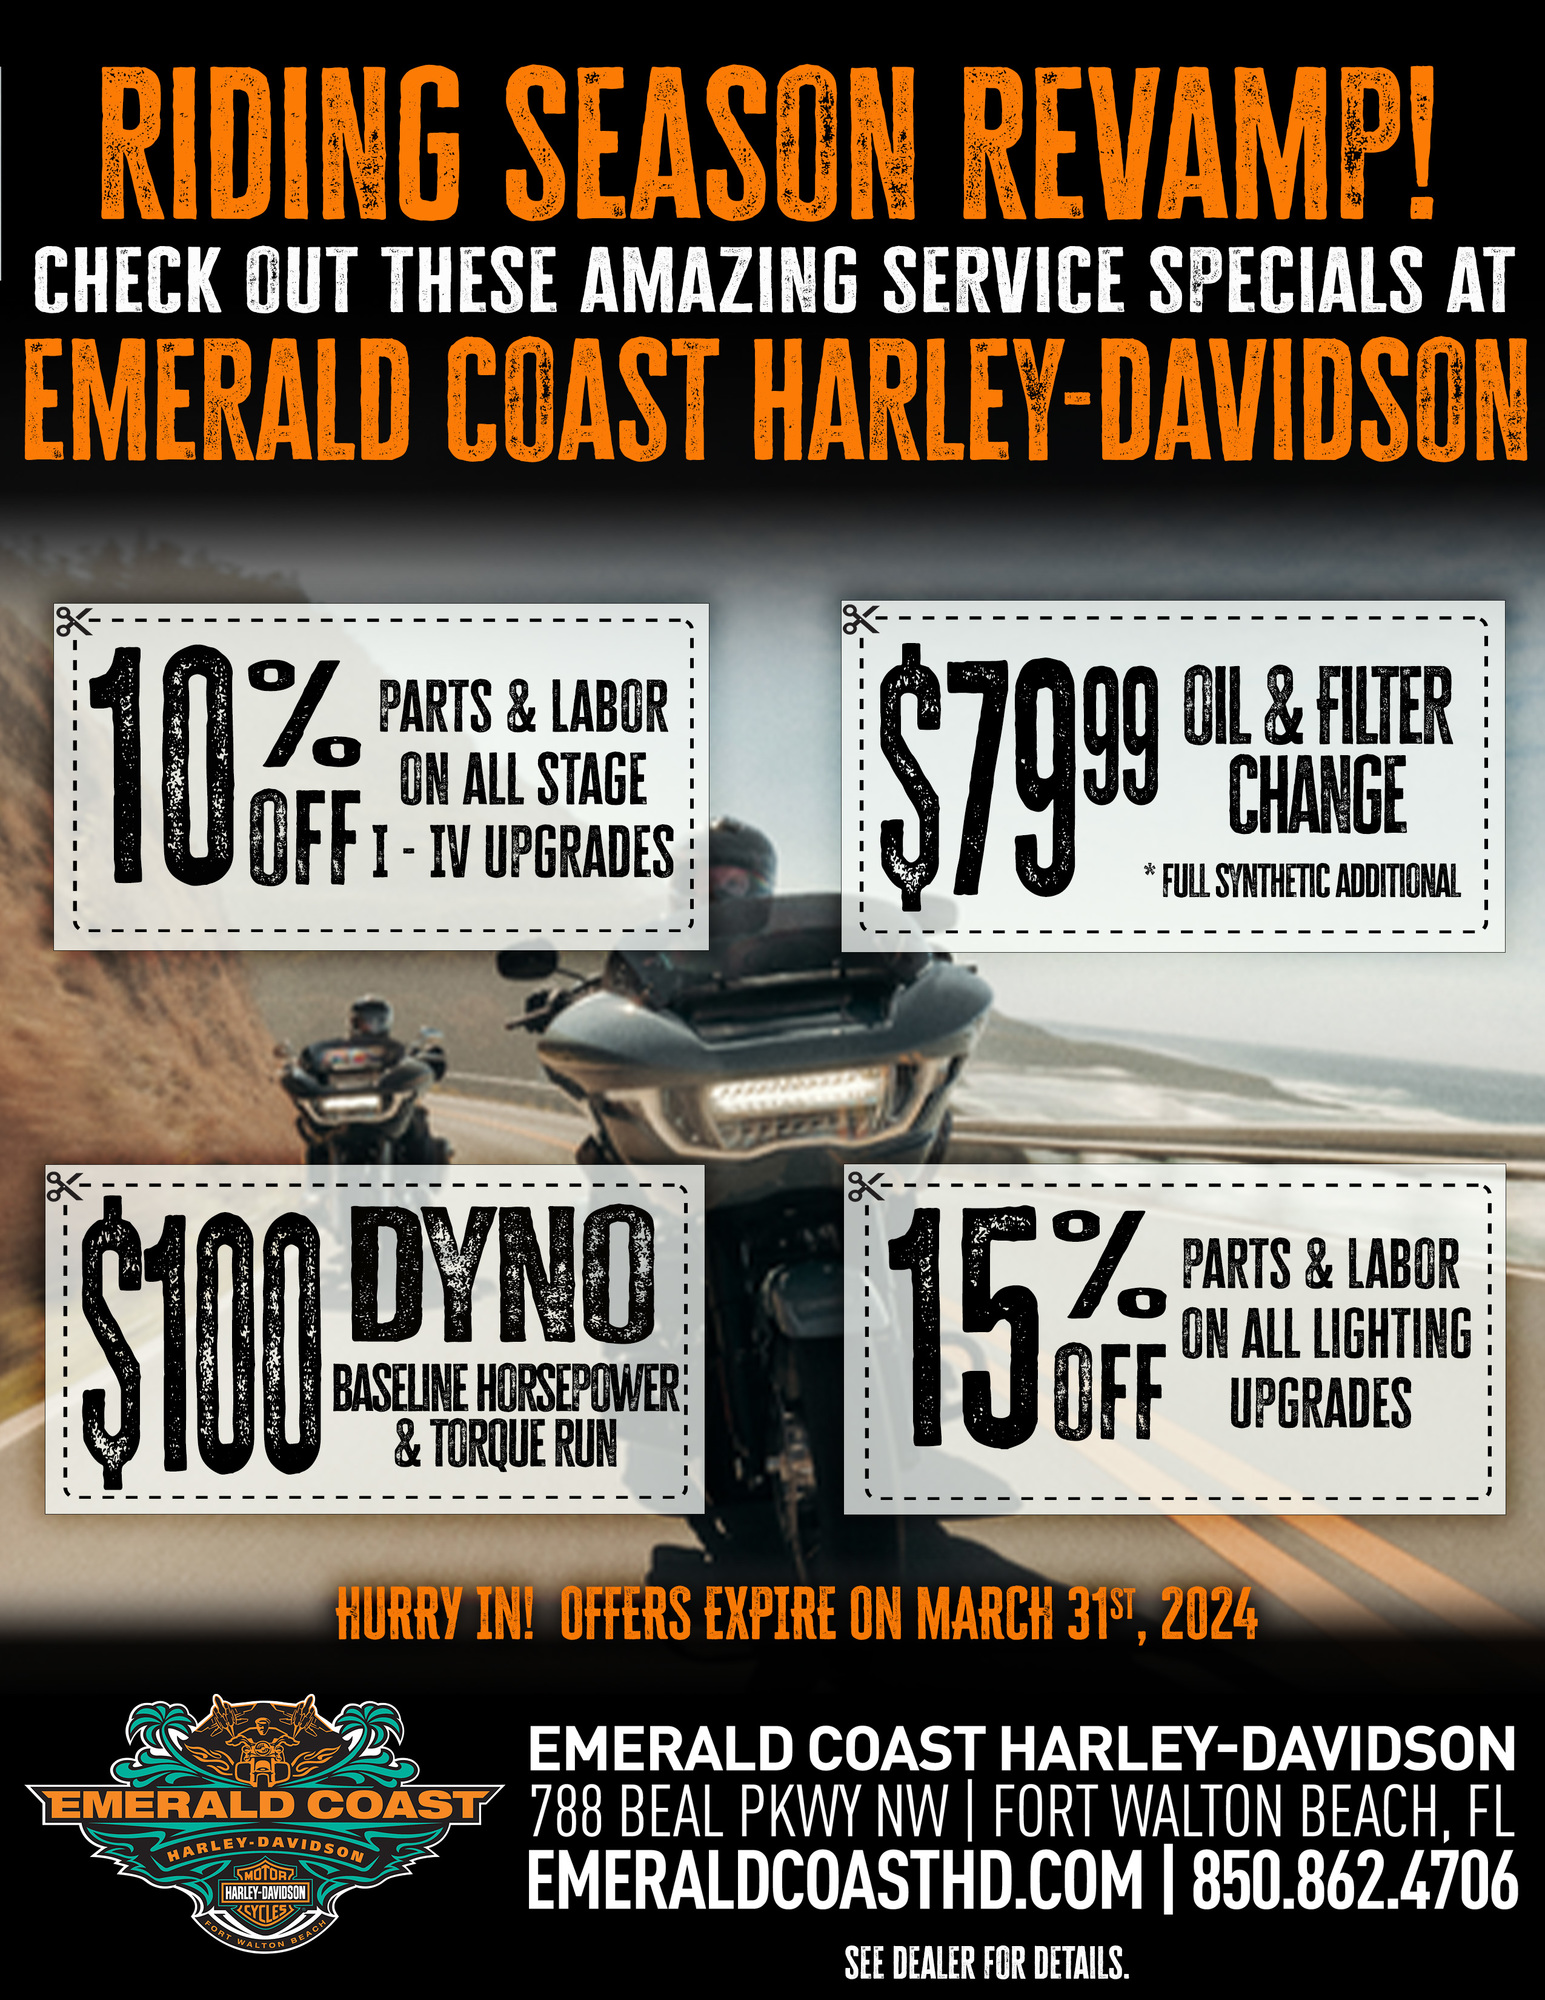 Go to emeraldcoasthd.com (service-request-harley-davidson-dealership--xservice_request subpage)